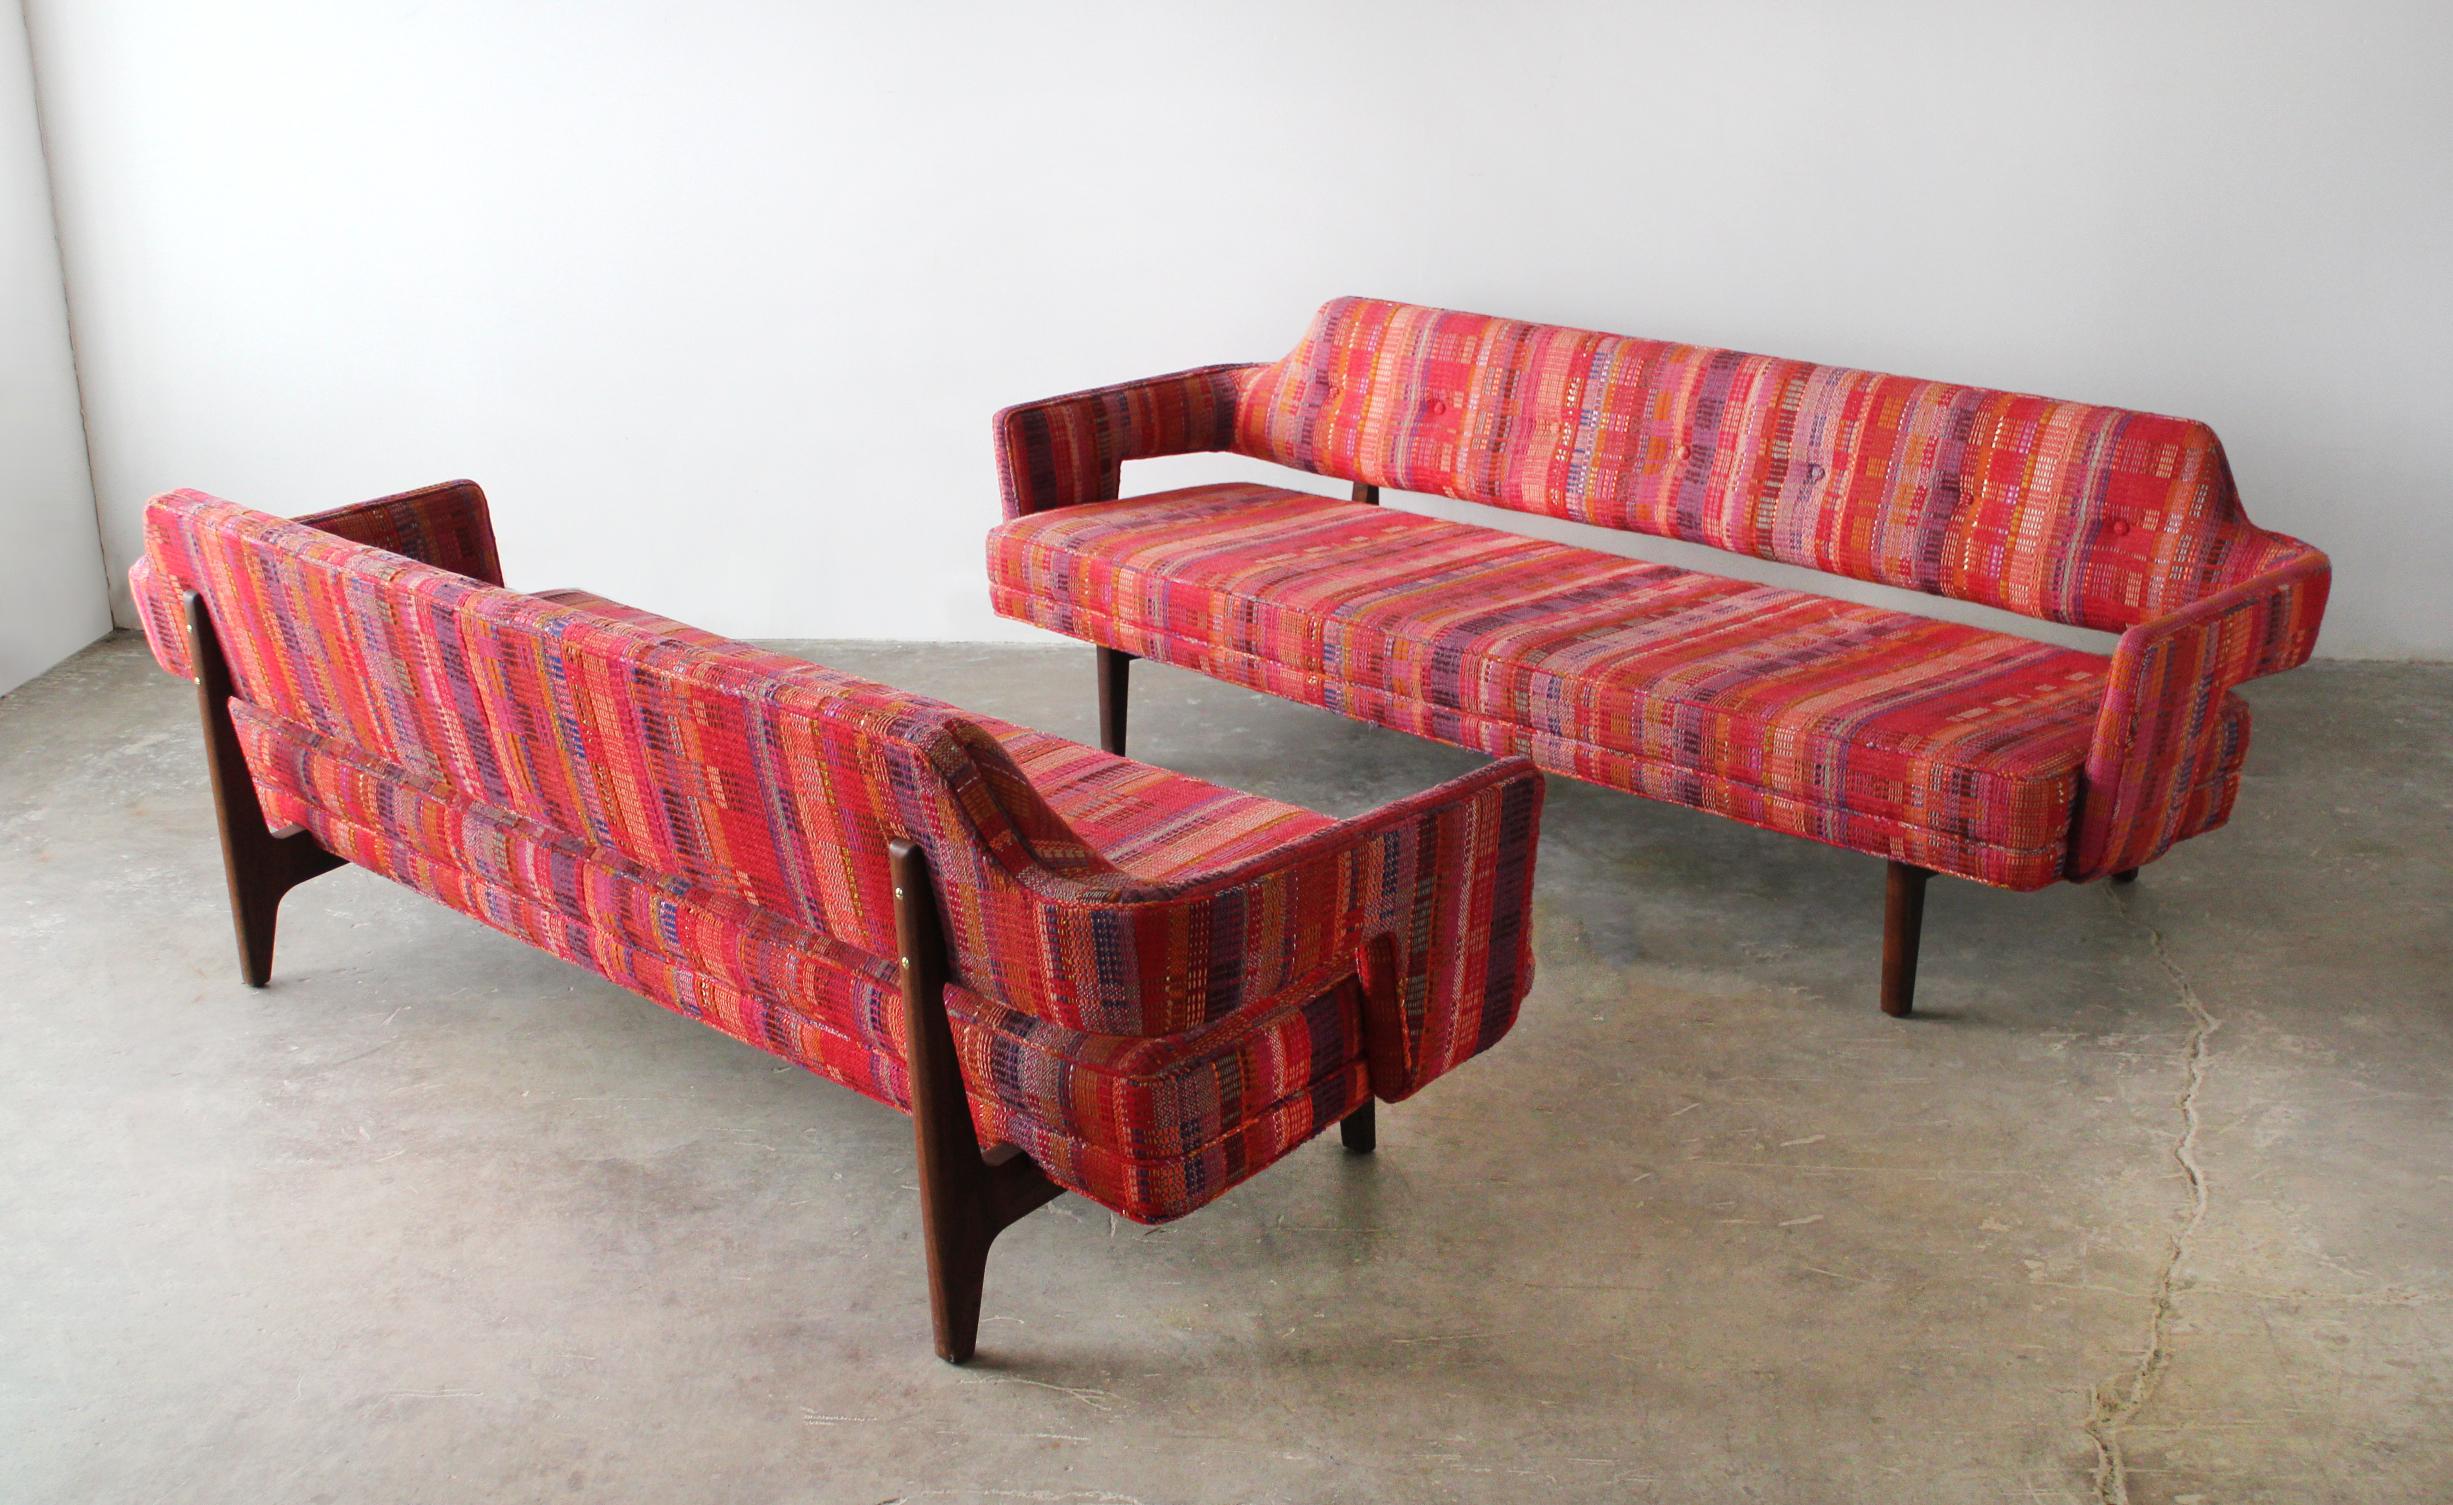 This is an early rare pair of floating back sofas designed by Edward Wormley for Dunbar model 6133. They are upholstered in the original Dorothy Liebes loom-woven textile and were acquired from an architect's private collection. Oiled walnut frames.